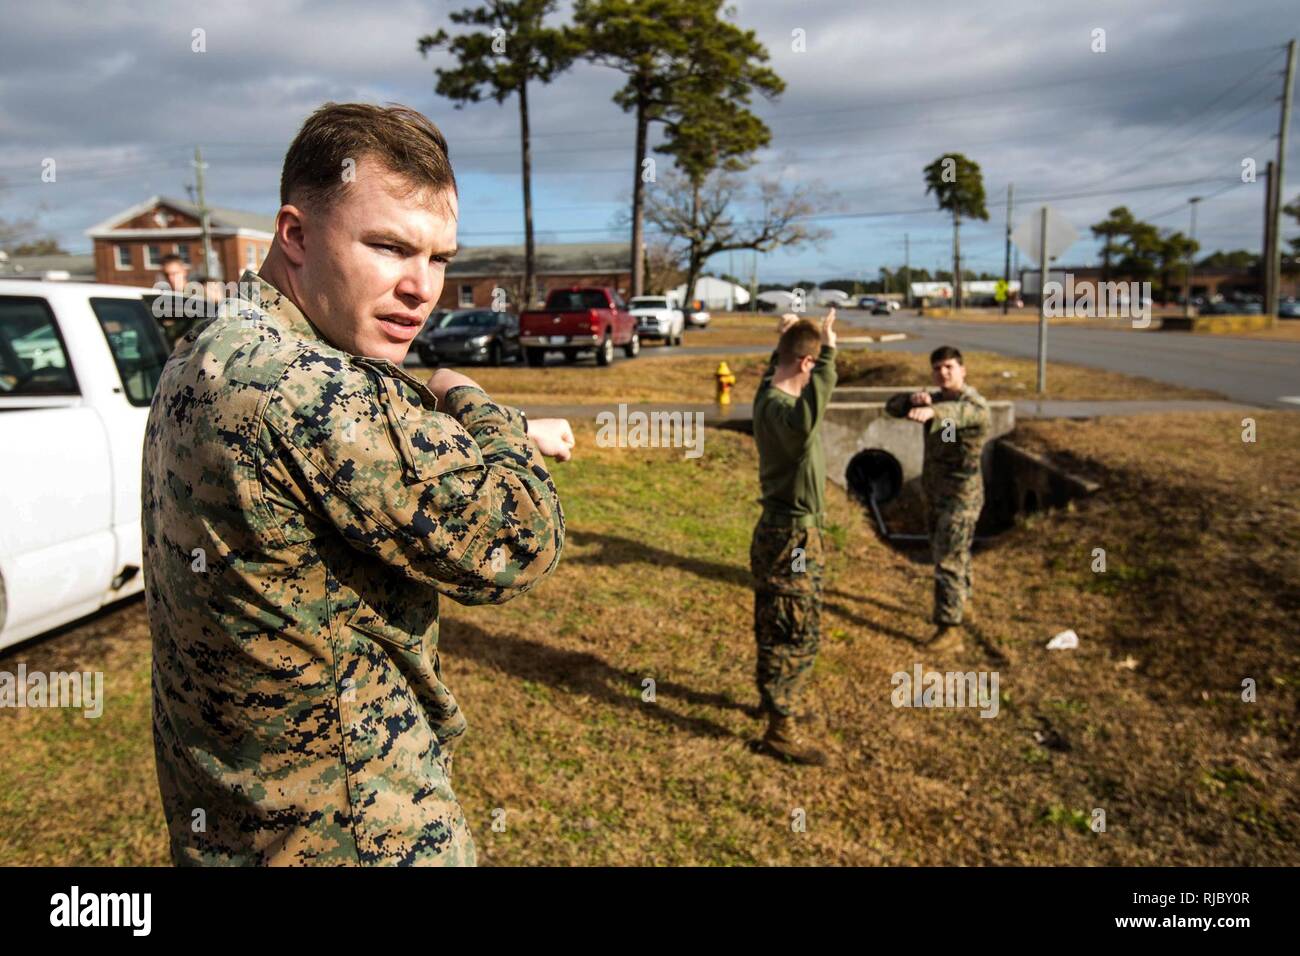 U.S. Marines with Battalion Landing Team, 2nd Battalion, 6th Marine Regiment, 26th Marine Expeditionary Unit (MEU), apprehend a simulated suspect during vehicle-borne improvised explosive device (VBIED) training on Camp Lejeune, N.C., Jan. 11, 2018. The two-day course was held to educate Marines on the proper procedures of inspecting vehicles and civilians for potential threats while also giving them the opportunity to practice techniques in preparation for the upcoming deployment. Stock Photo